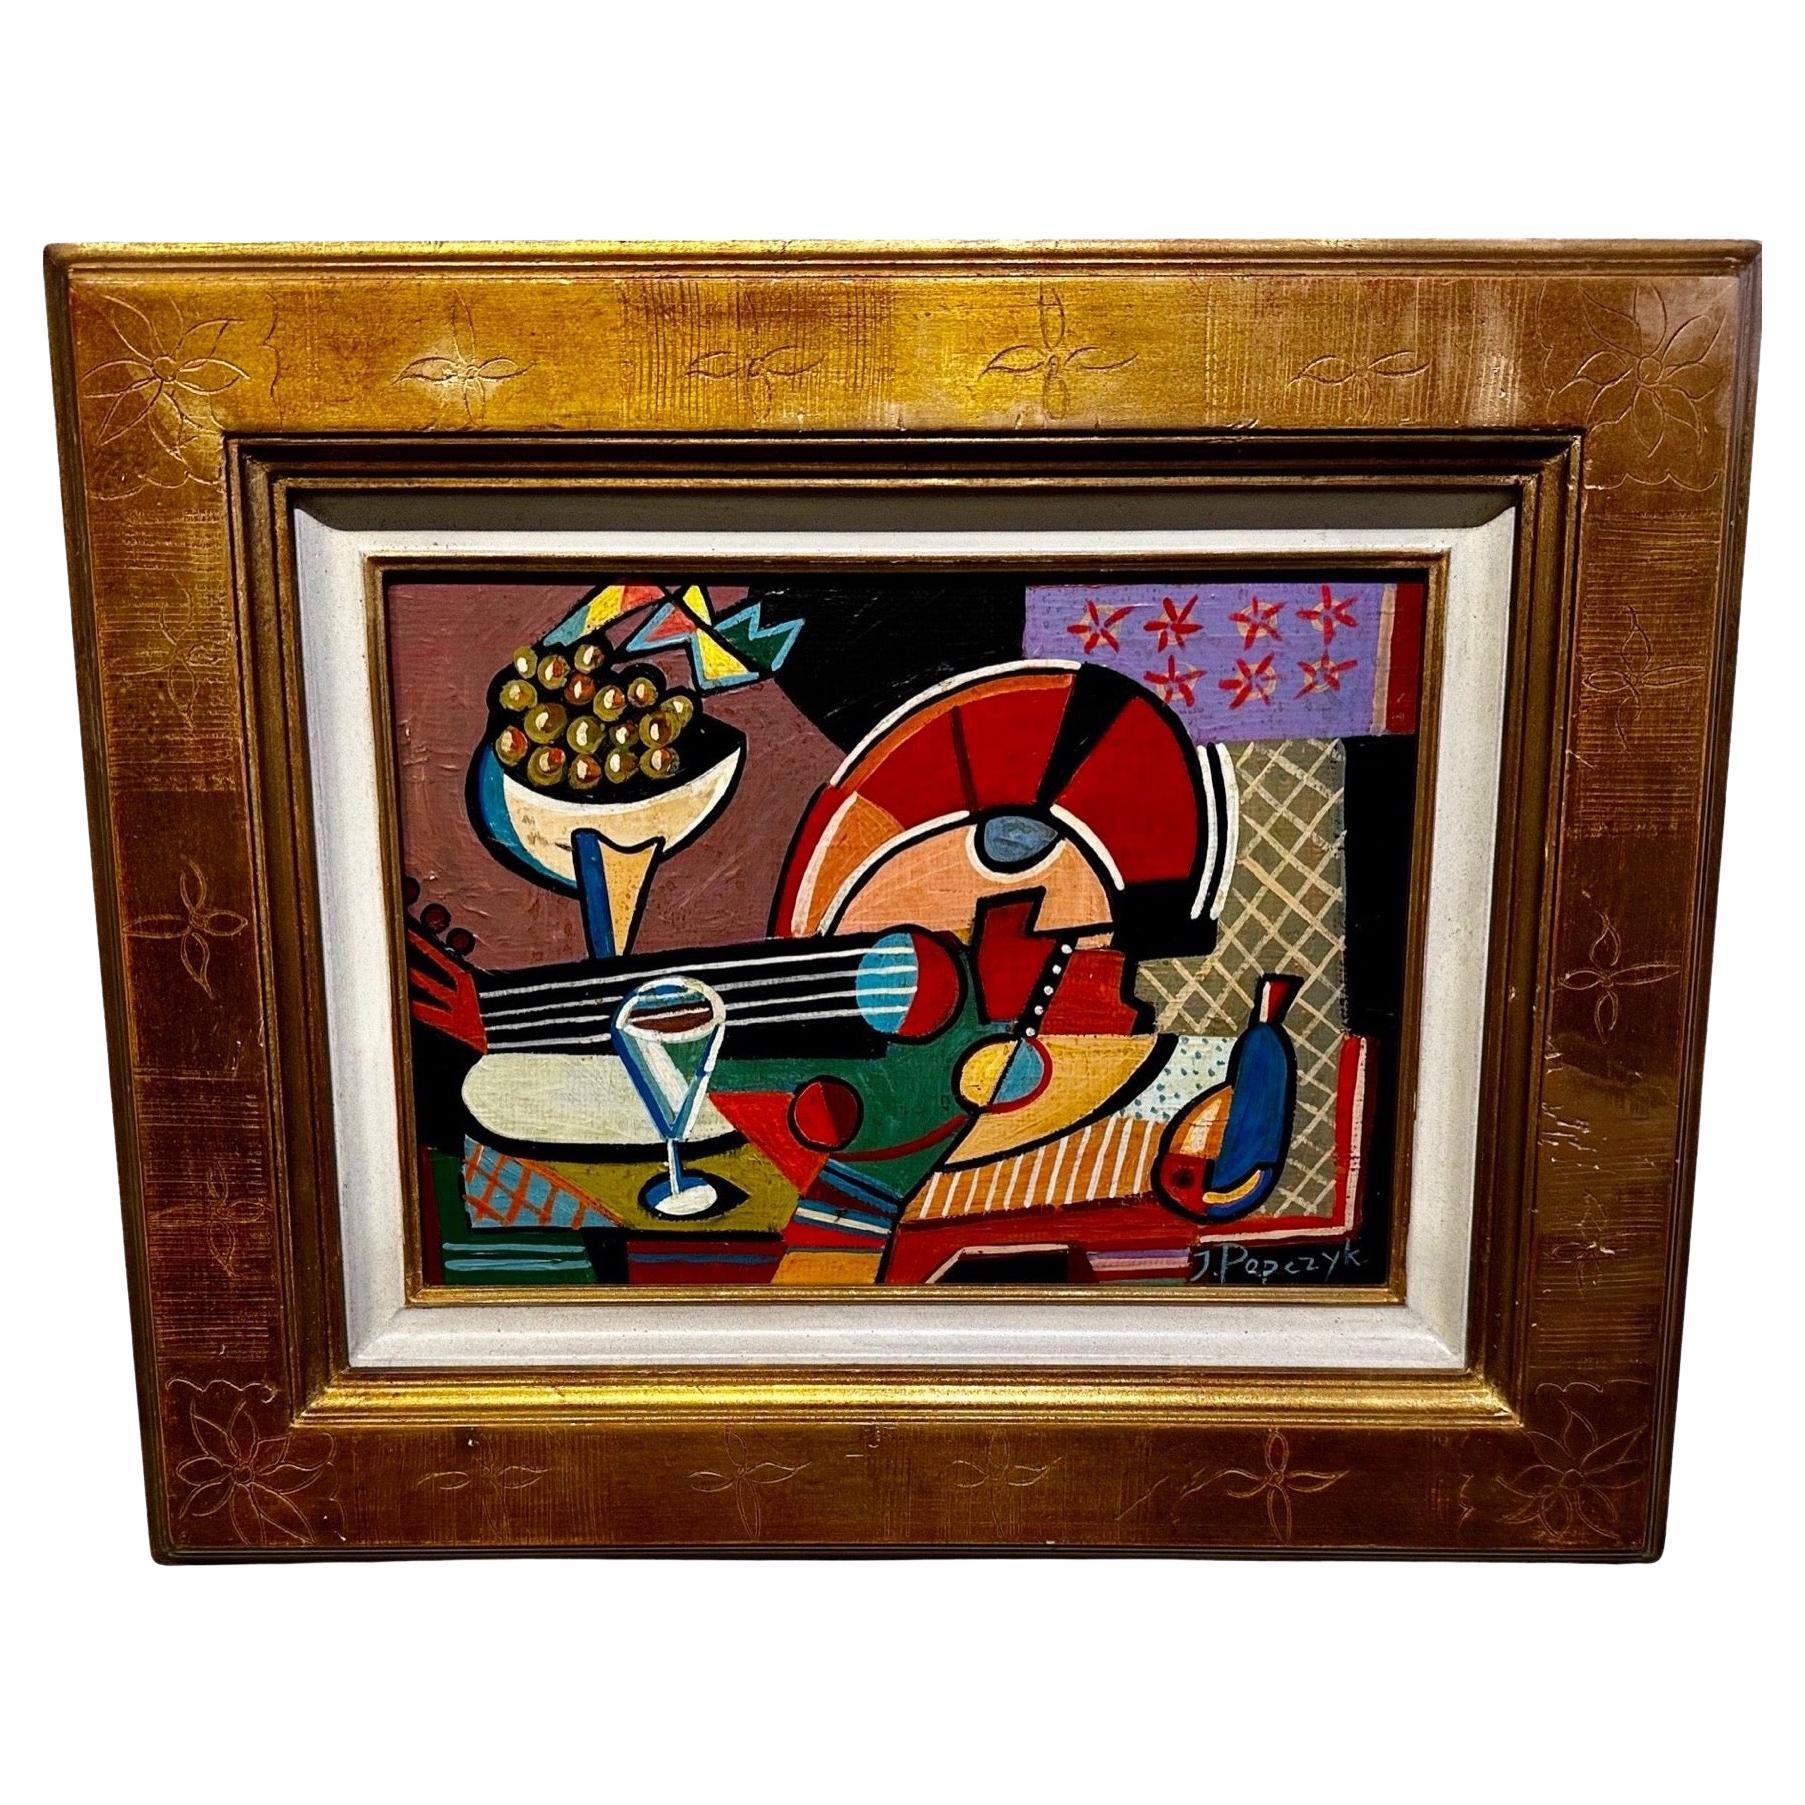 Jozef Popczyk Cubist Art Deco Painting Still Life oil on poster board. Joseph Popczyk is a Polish artist known for his vivid palette and love of Cubism, and in this case, the chevrons and wavy patterns of Art Deco can also be detected. Like many of